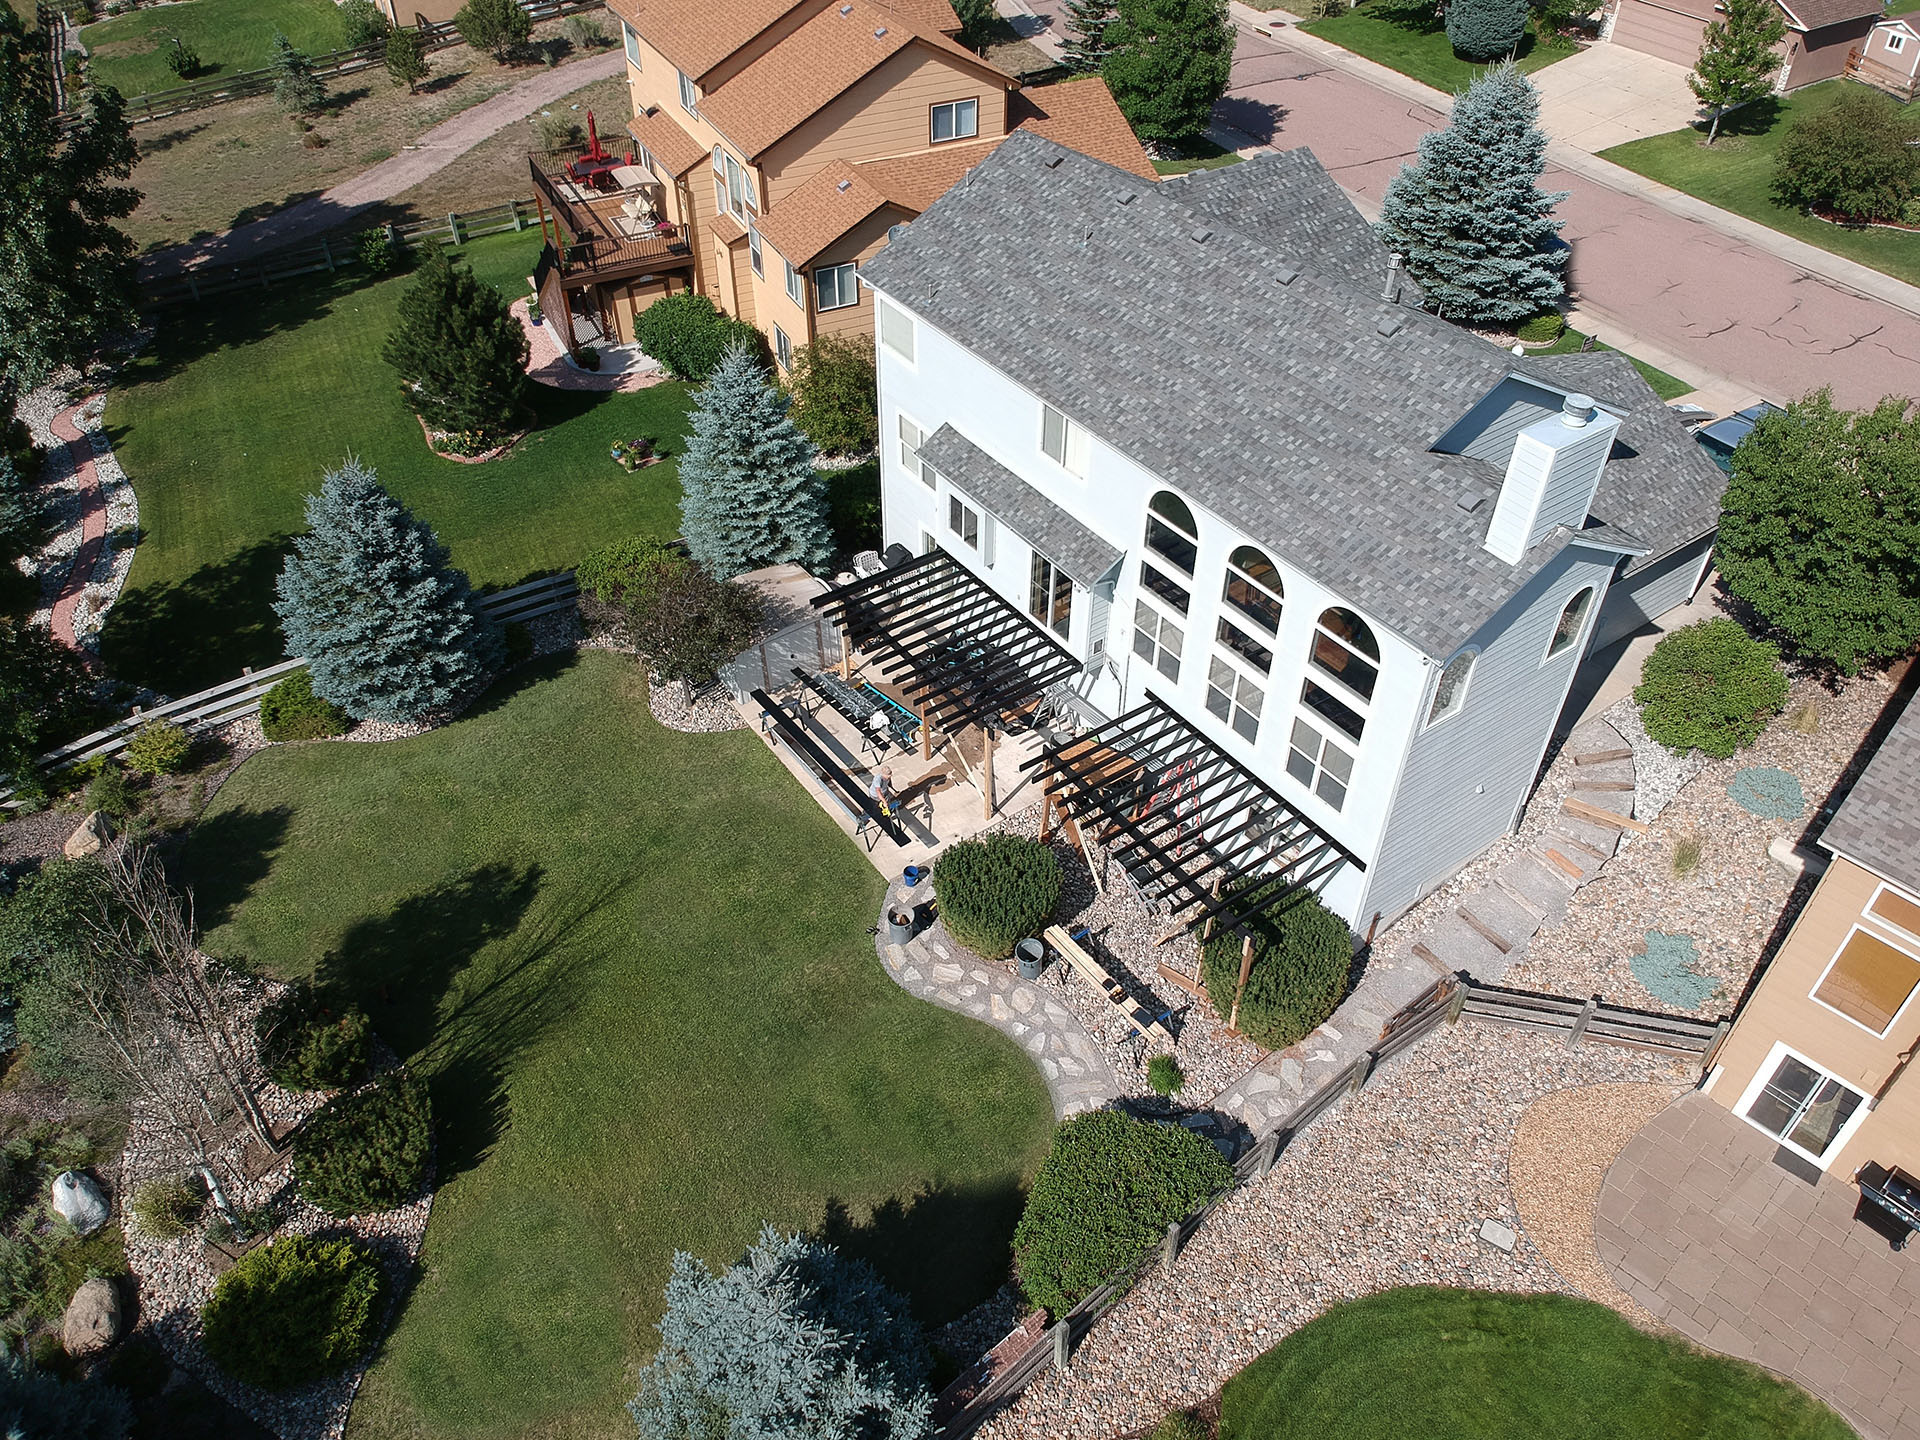 Aerial view of residential property with steel-framed deck under construction.